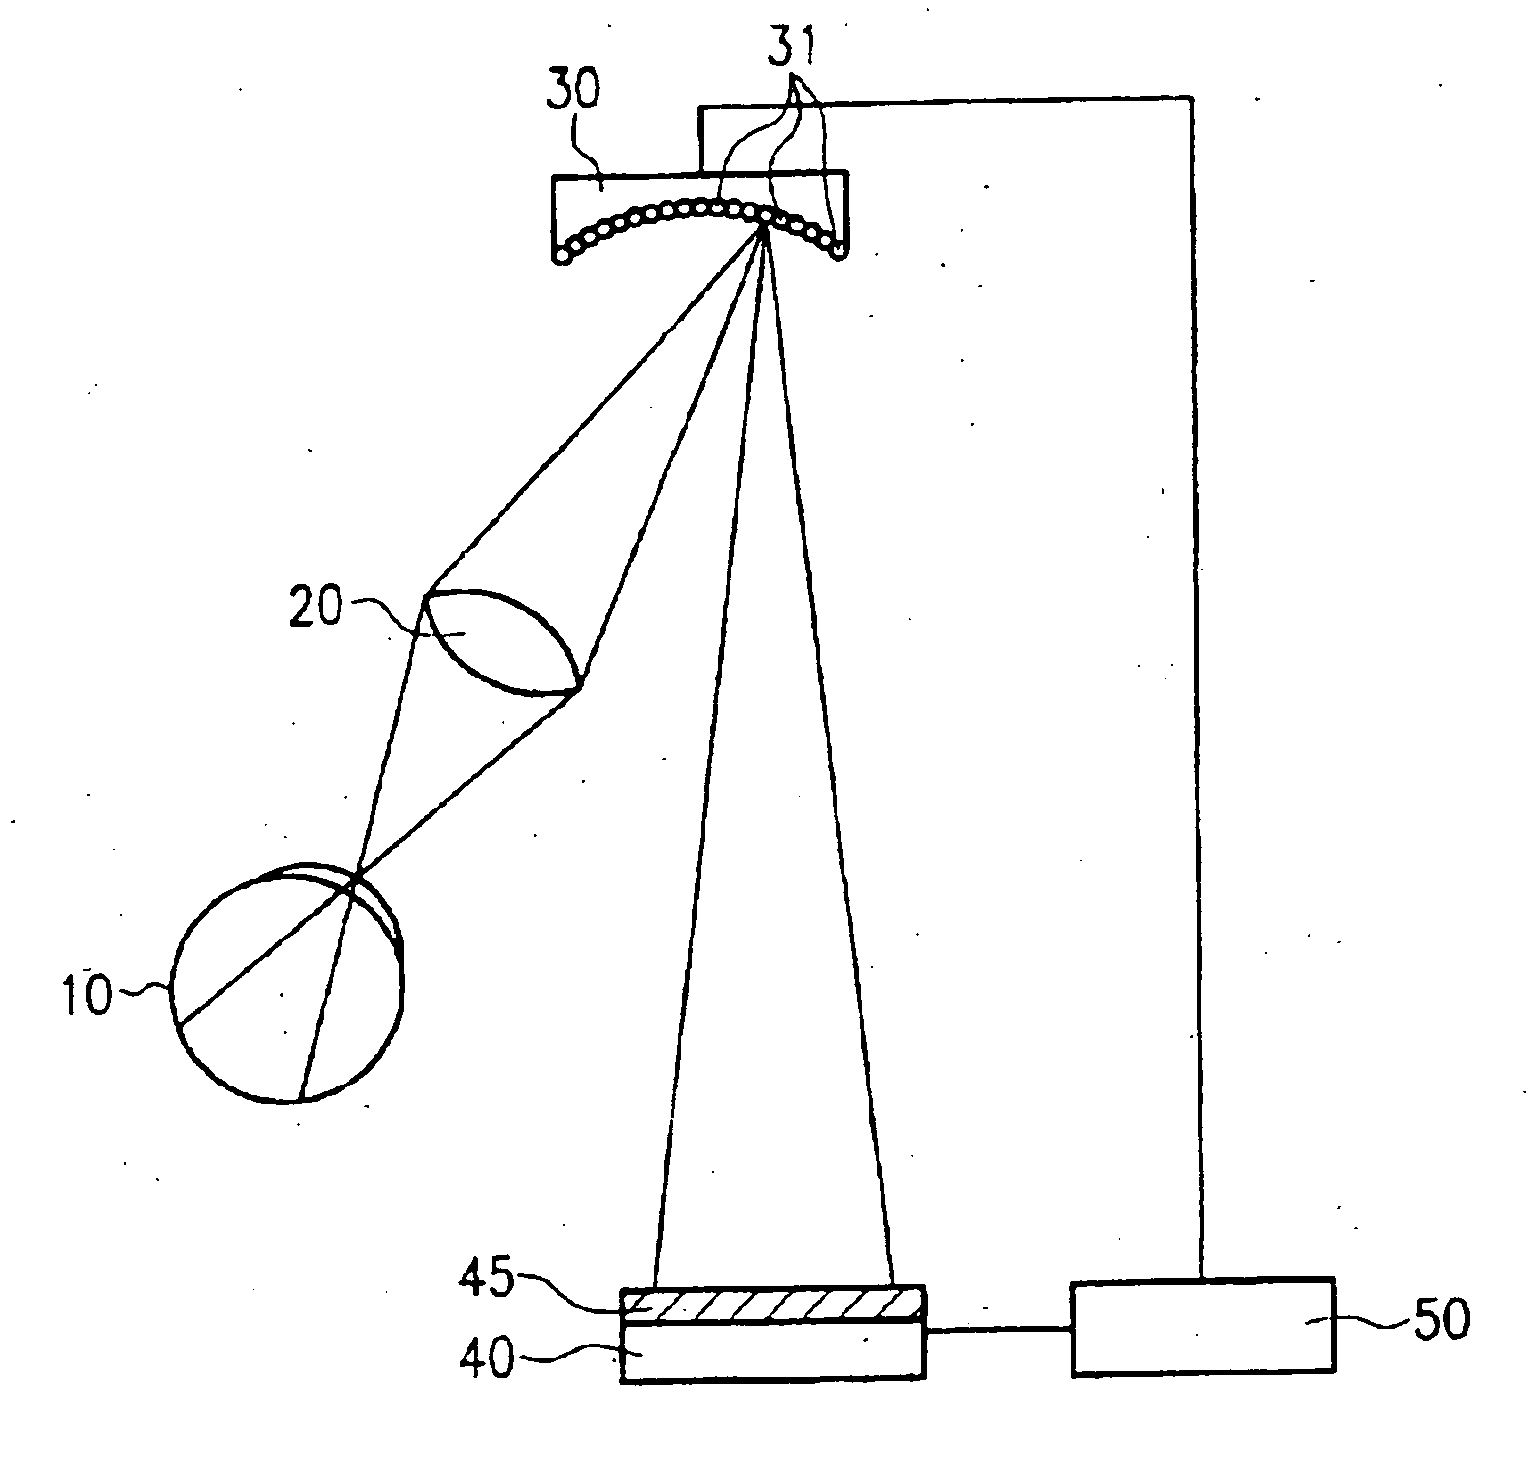 Method for determining vision defects and for collecting data for correcting vision defects of the eye by interaction of a patient with an examiner and apparatus therefor